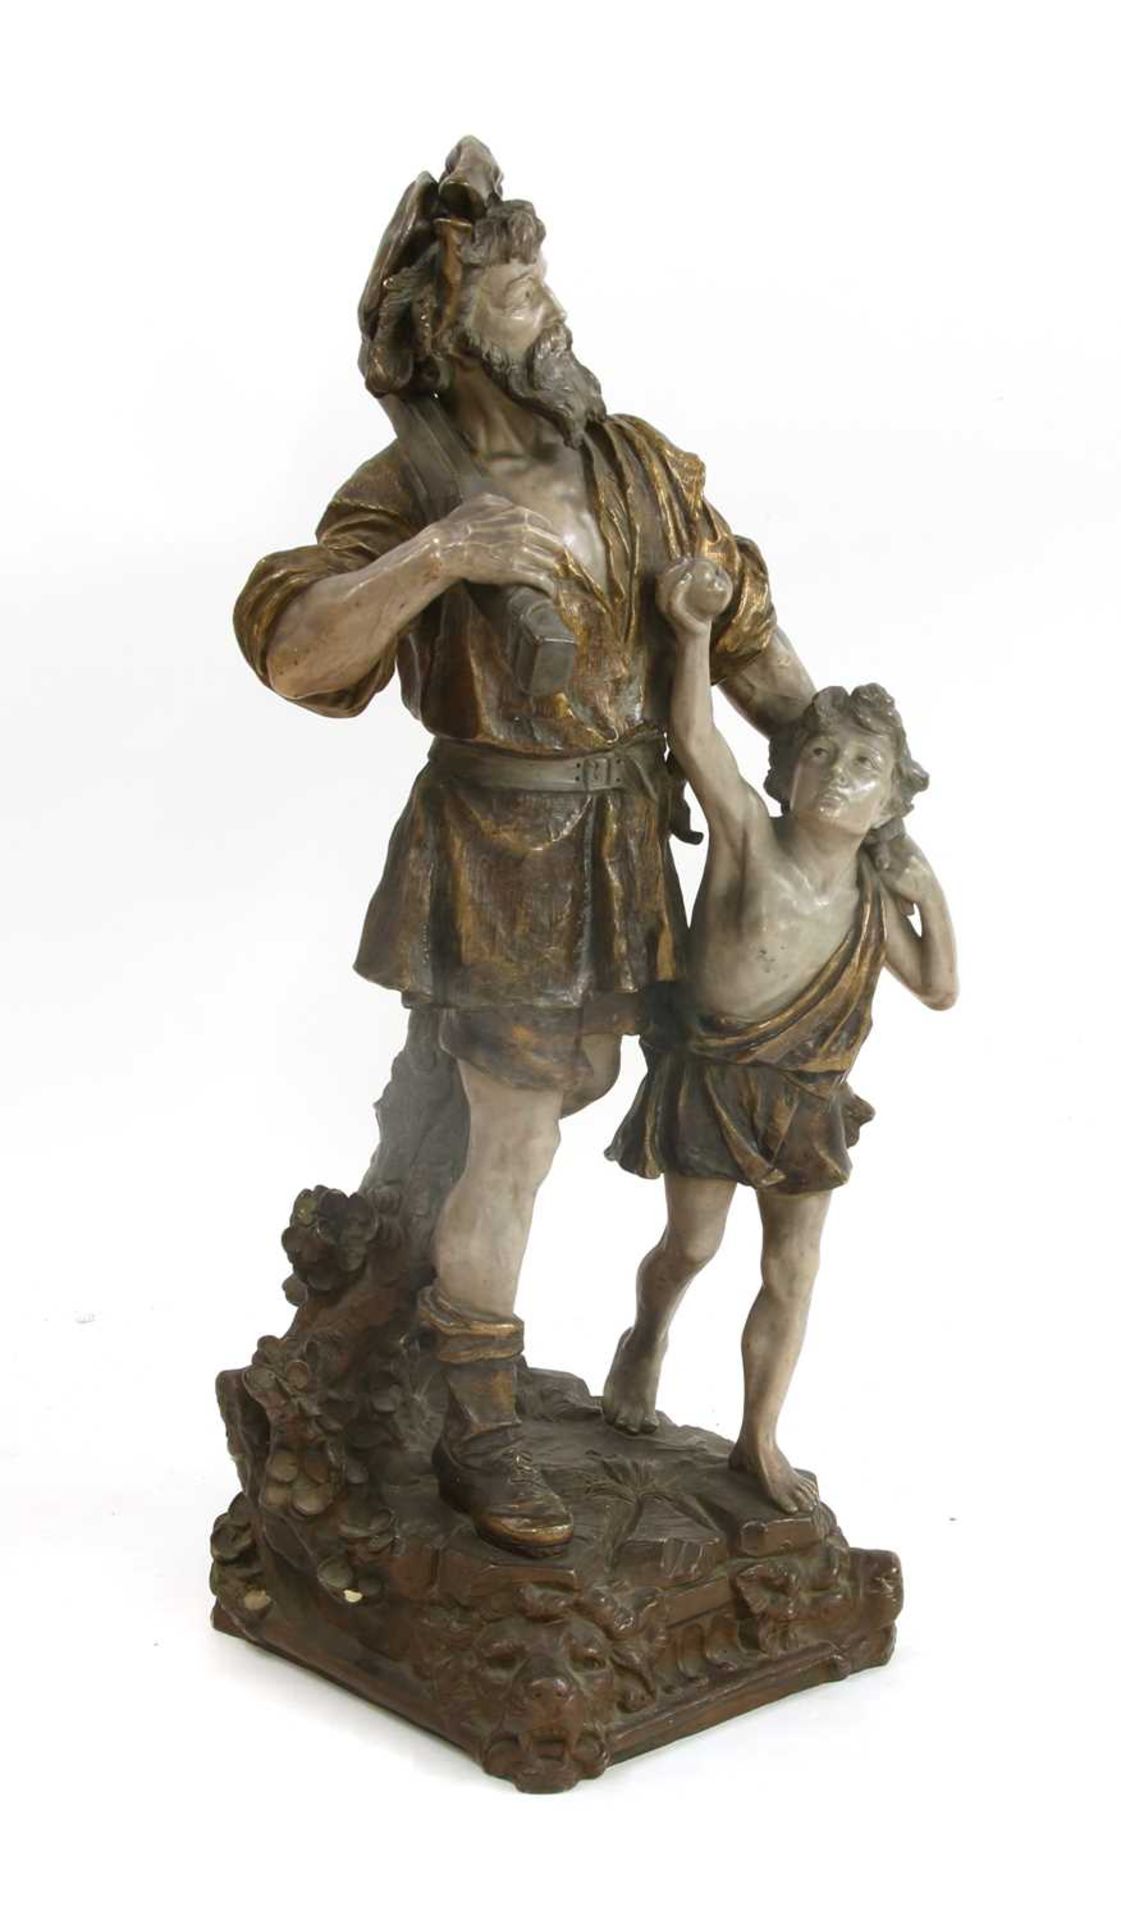 A large terracotta group of William Tell and his son, who is holding up an apple, - Image 2 of 3